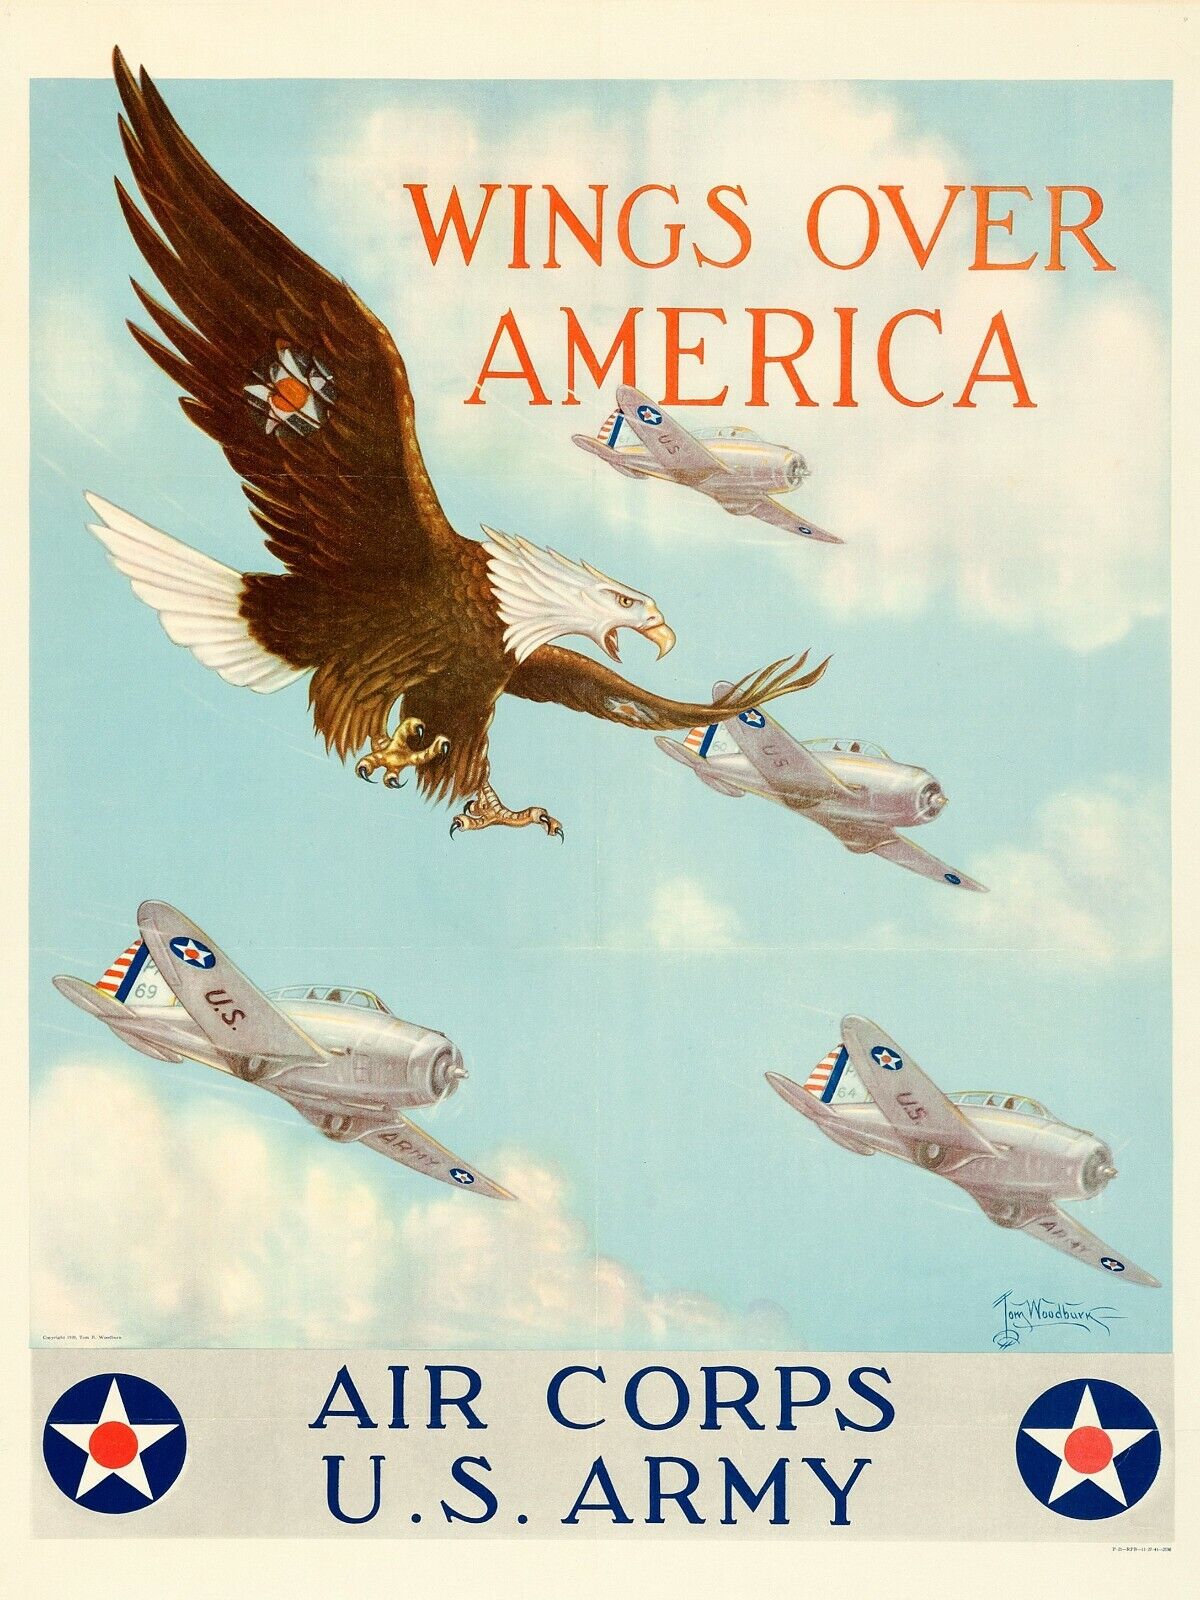 1939 US Army Air Corps NEW Metal Sign: Wings Over America - Eagle Theme